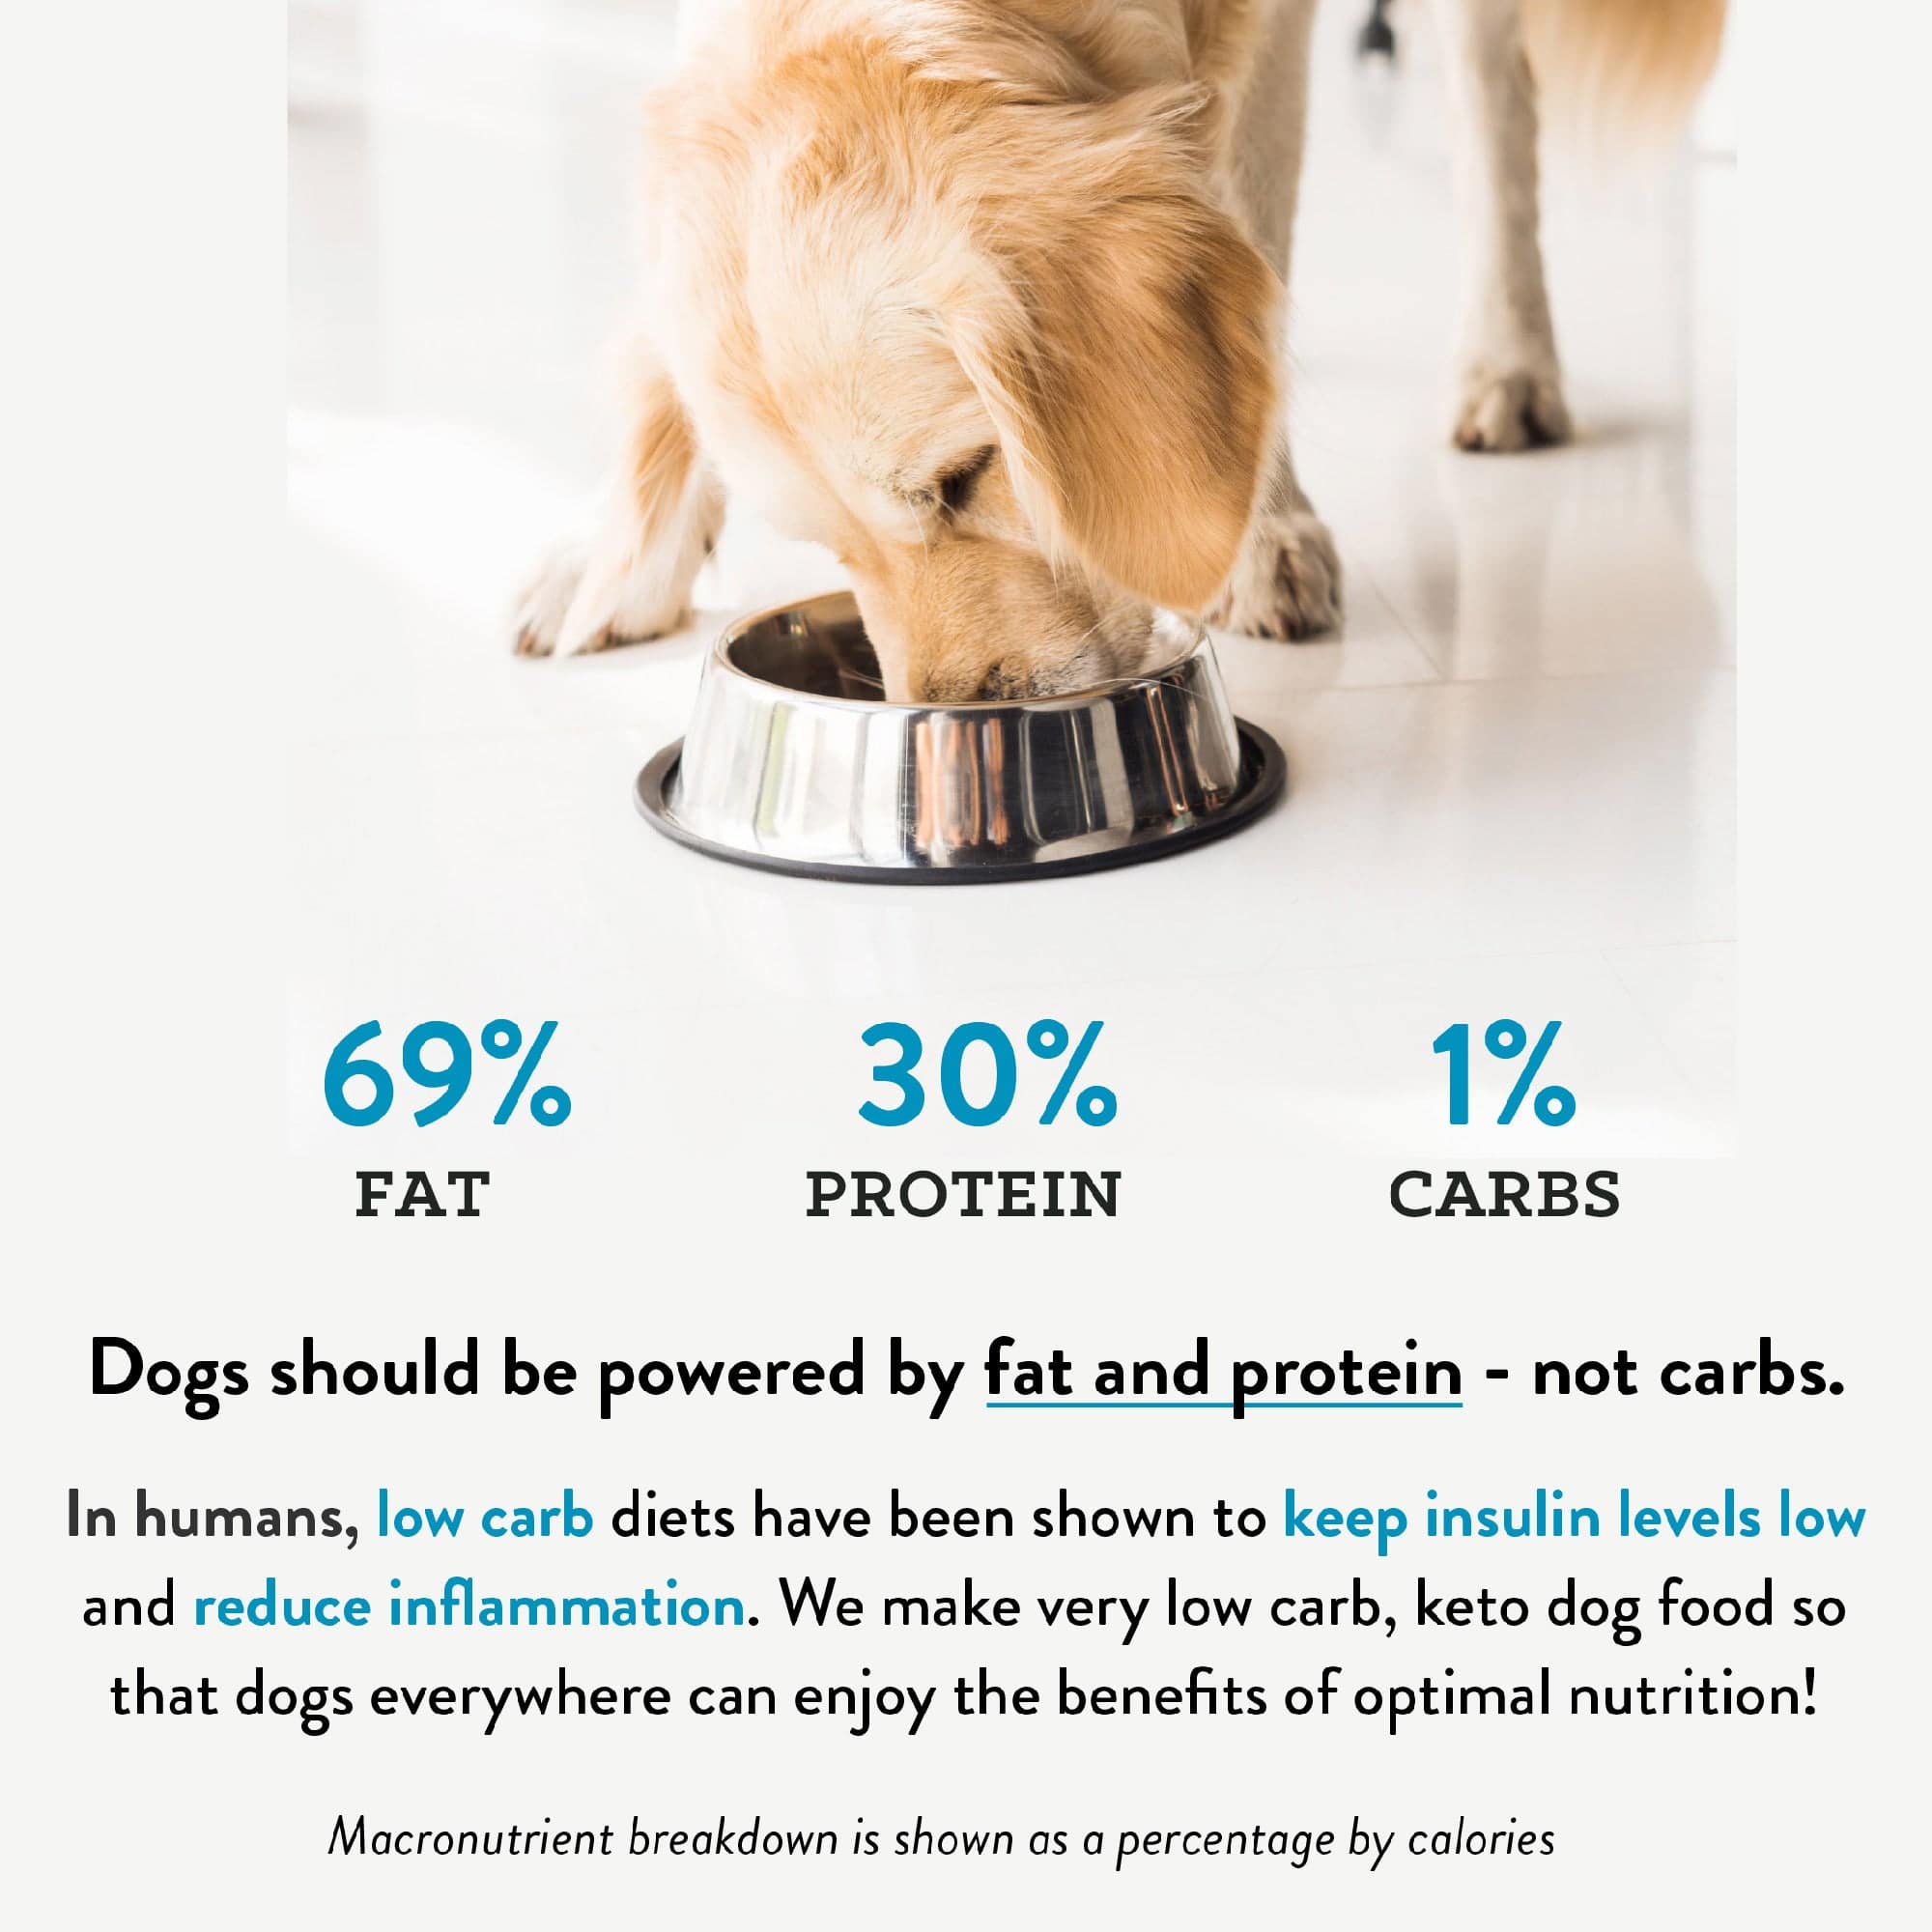 are carbs good for dogs